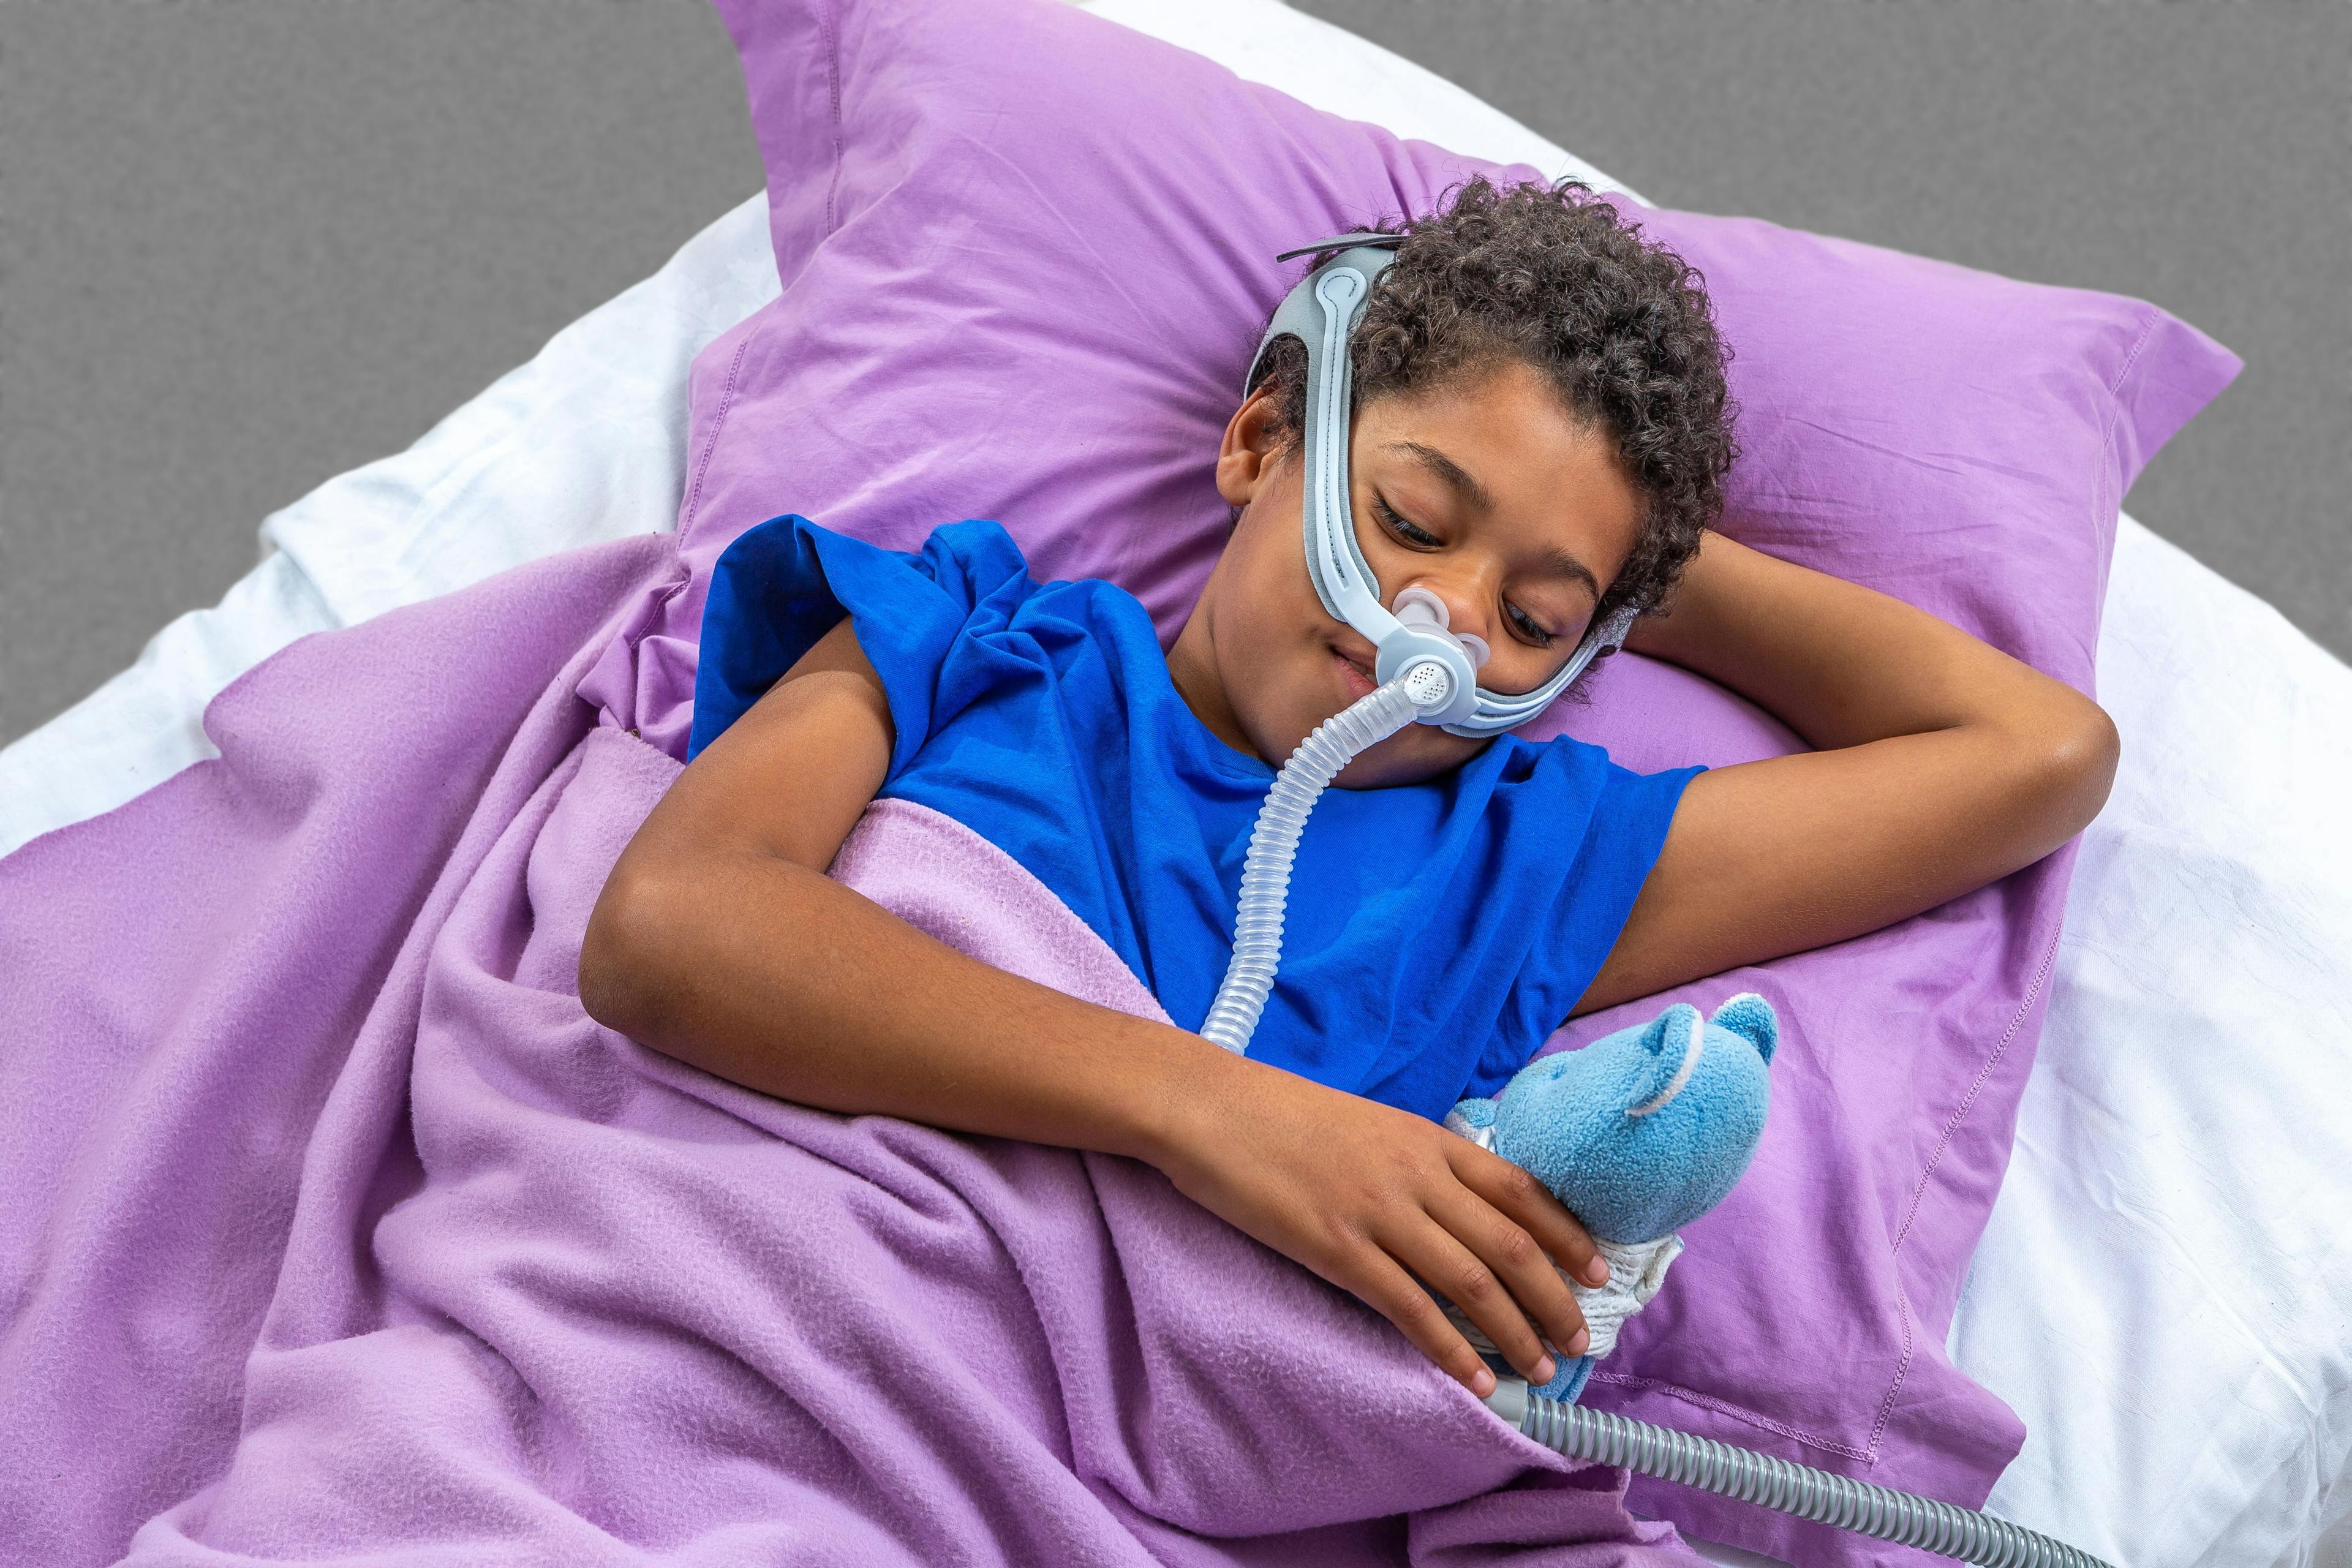 Obstructive Sleep Apnea is Common in Kids and May Impact Blood Pressure, Heart Health